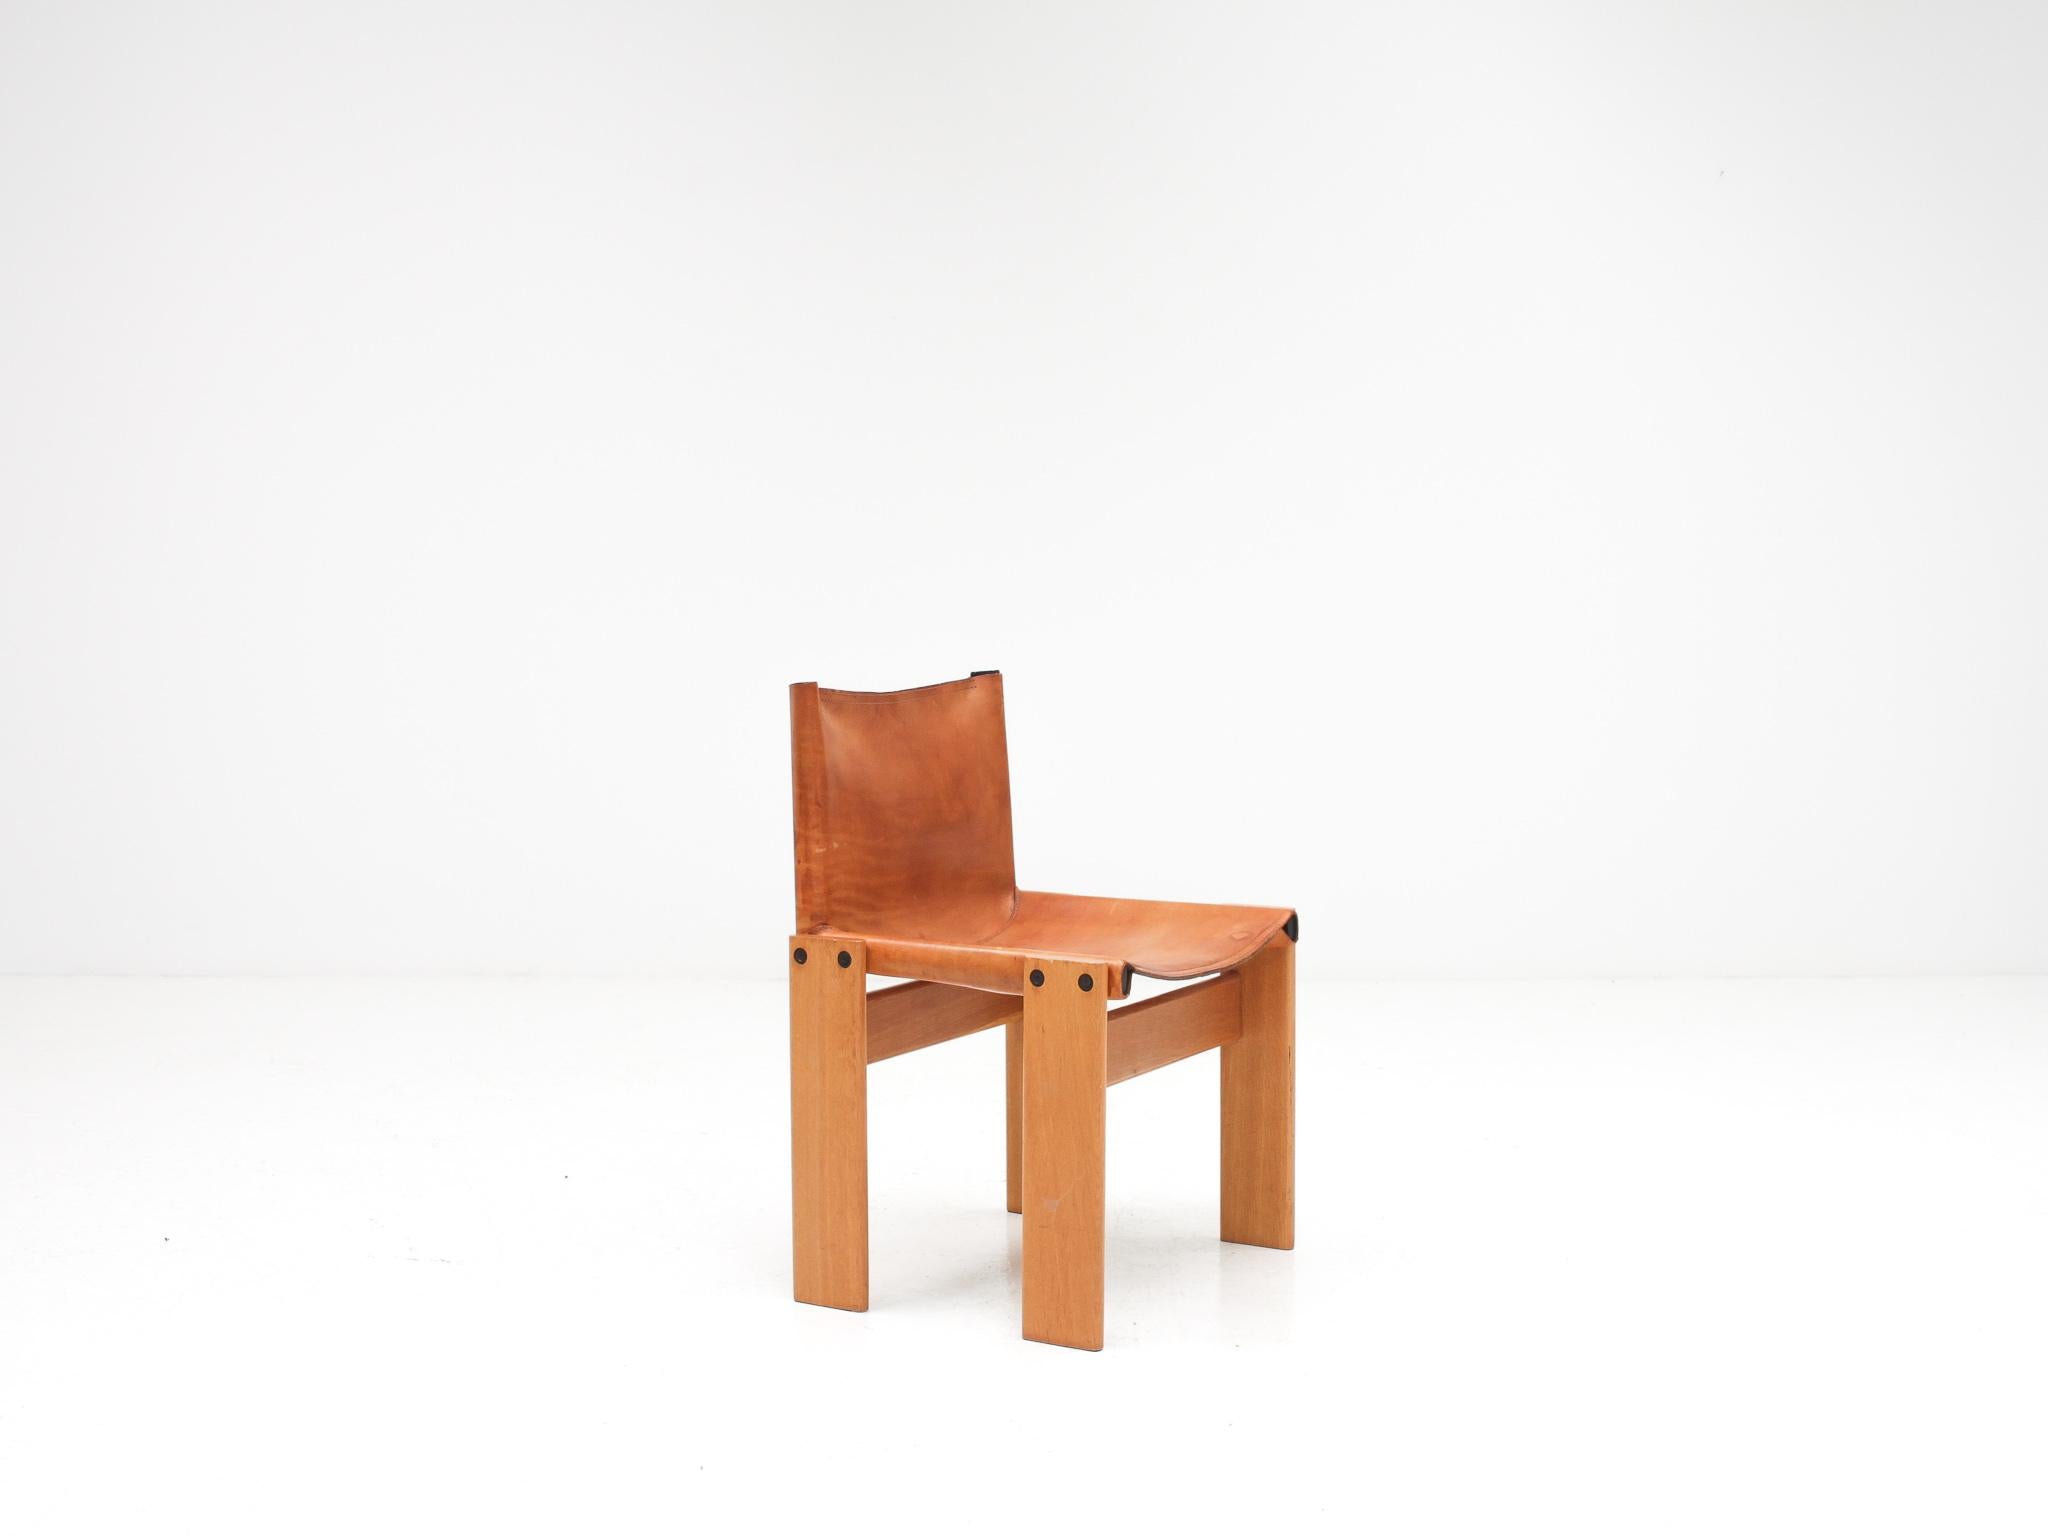 20th Century 'Monk' Chair by Afra & Tobia Scarpa for Molteni, Italy, 1974